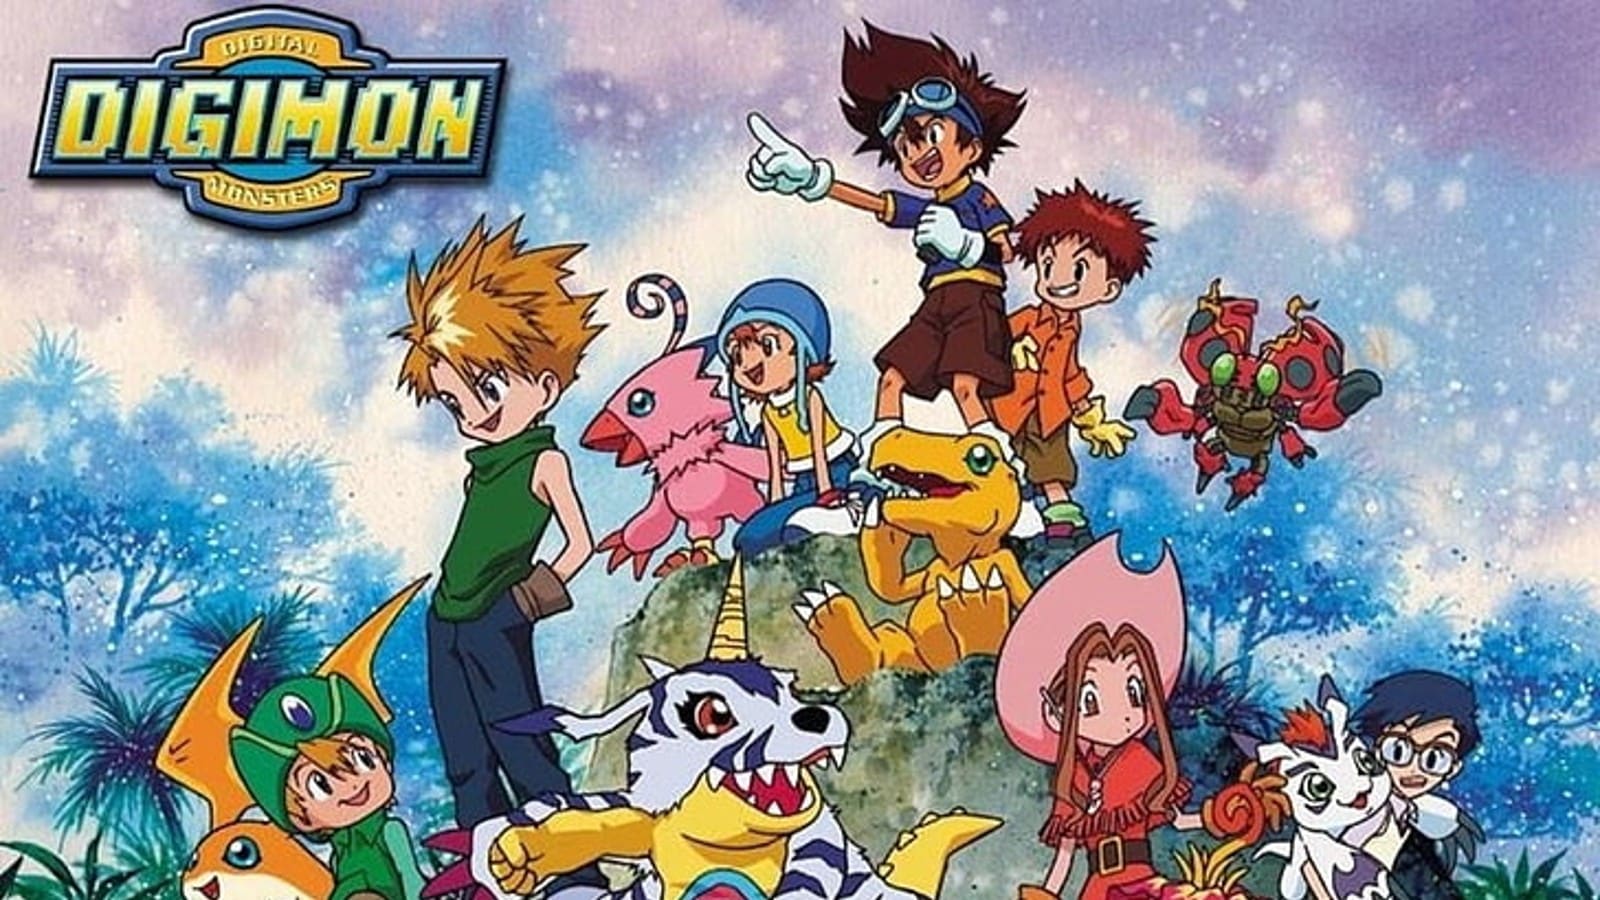 An image of the seven original Digi-destined characters featured in the Digimon Adventure anime.